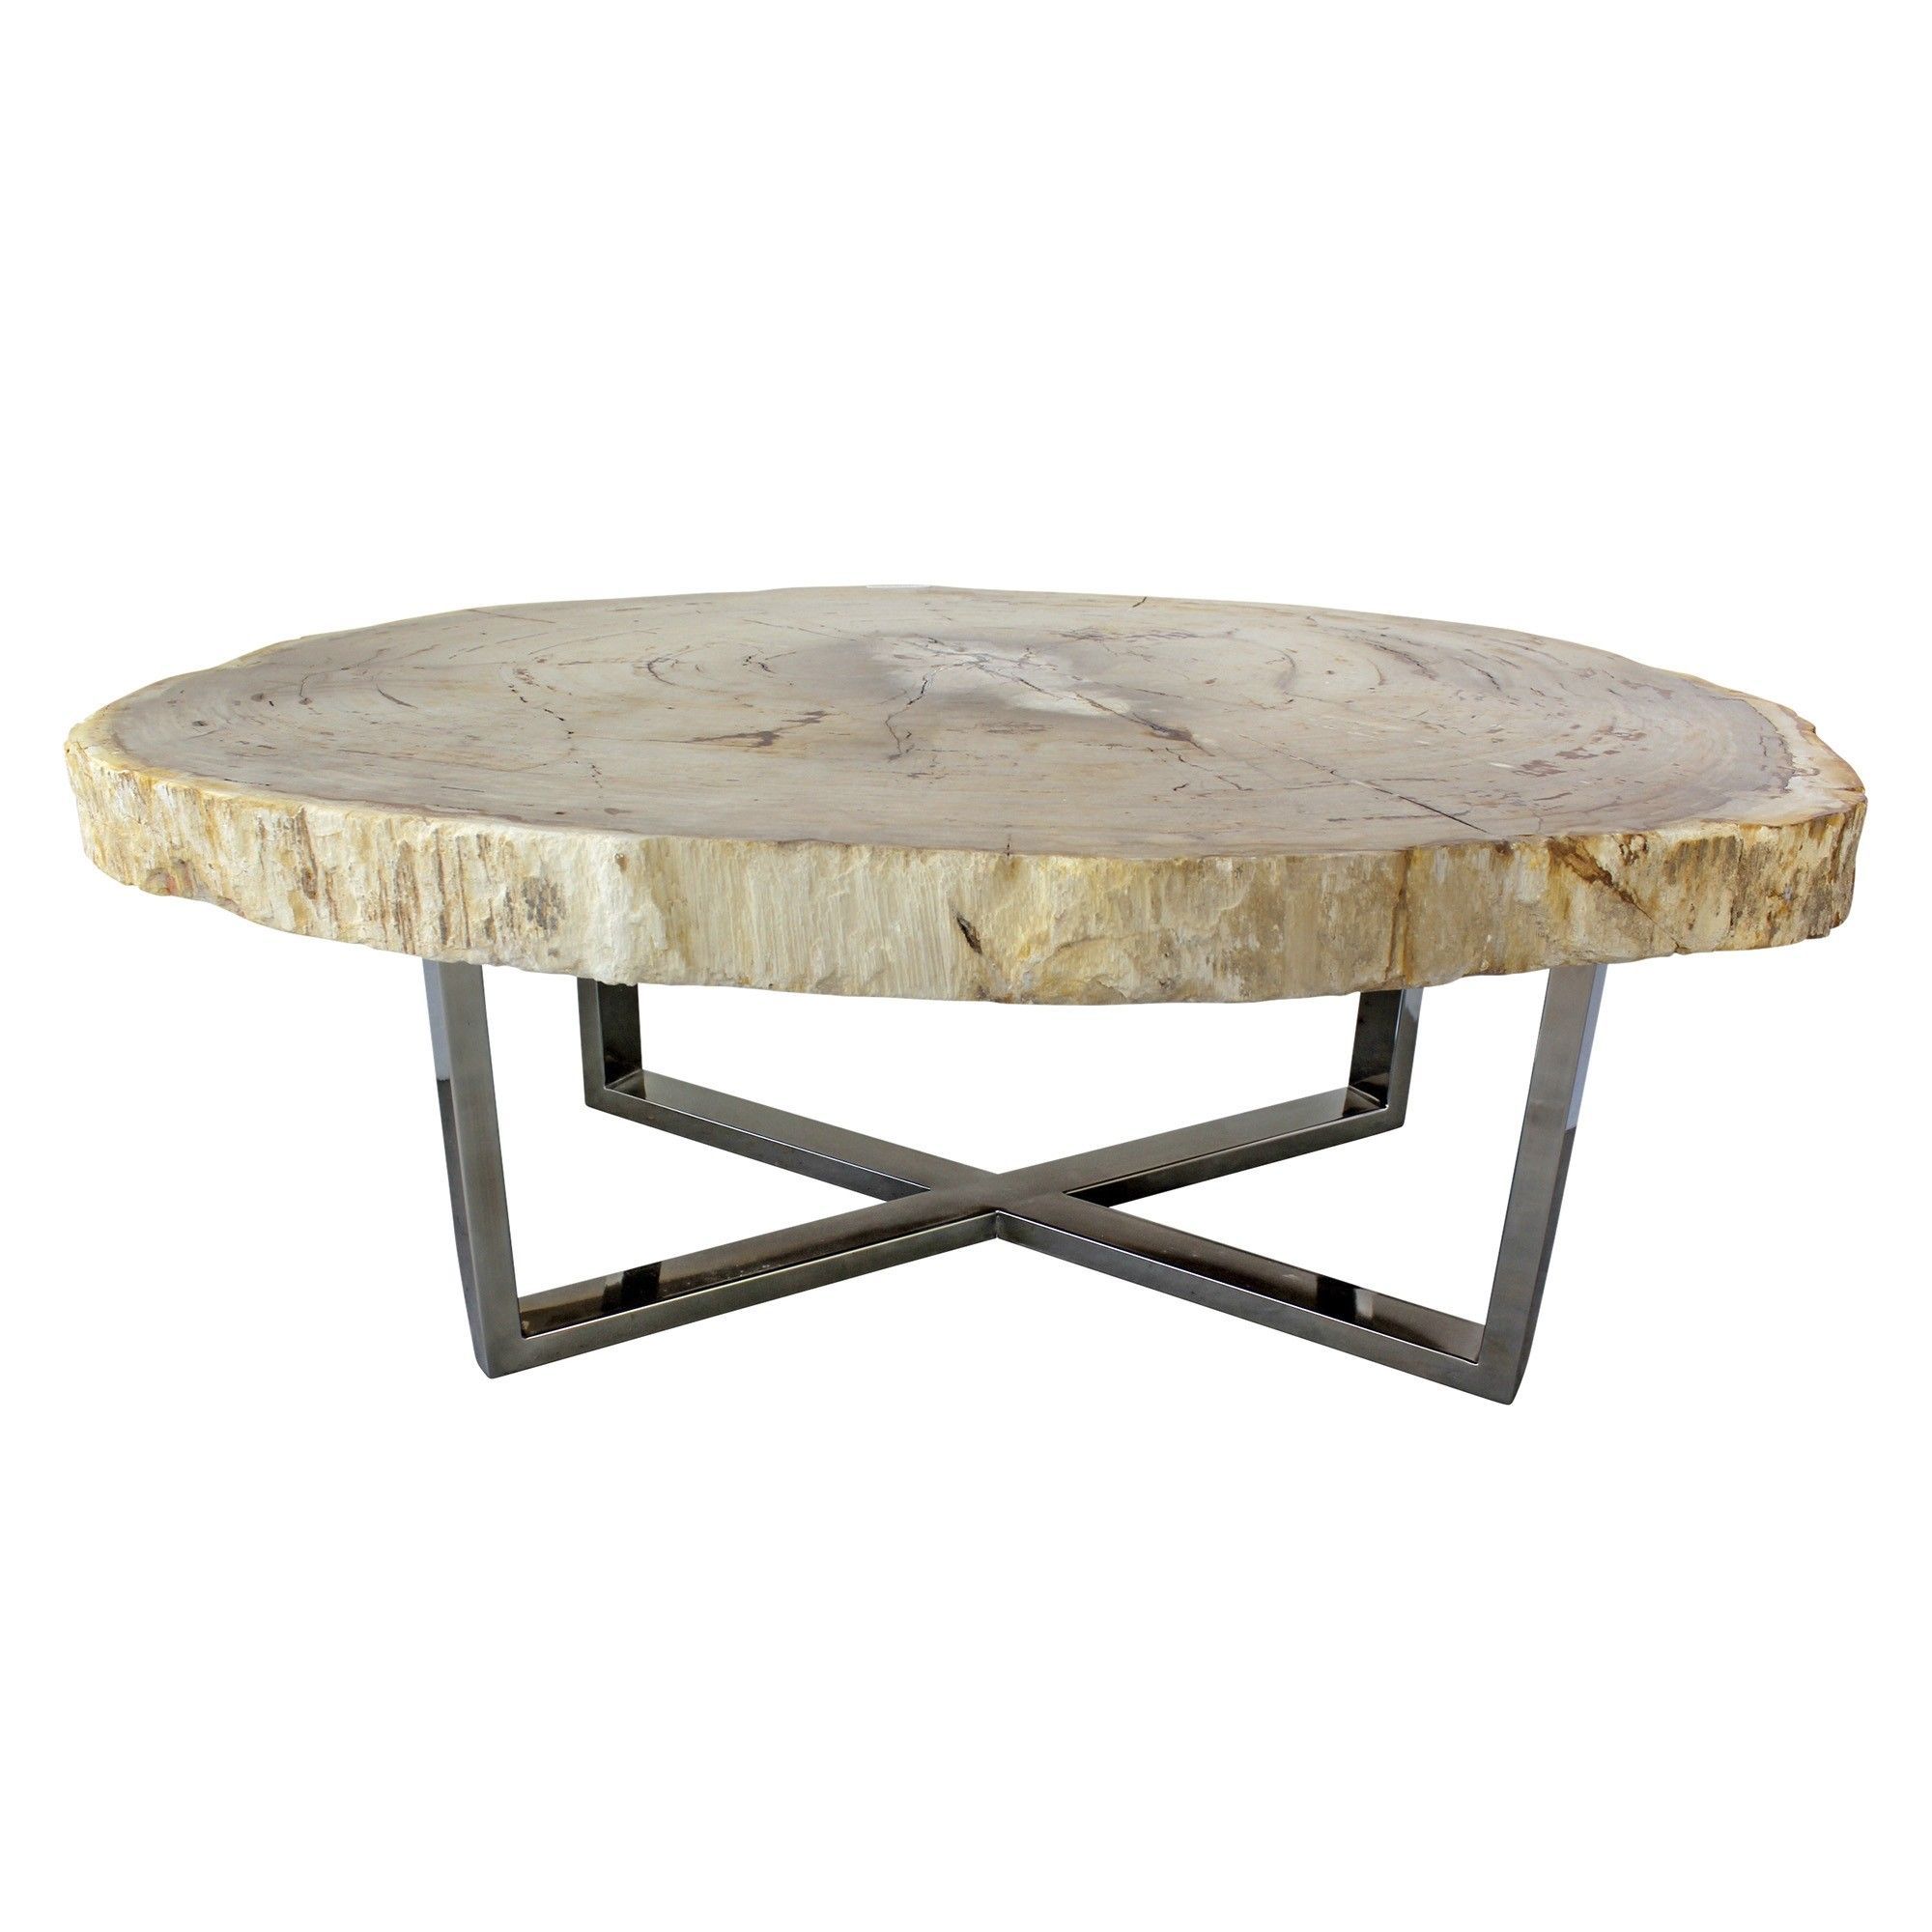 A Coffee Table Featuring A Solid, Light Natural Edge Within Light Natural Drum Coffee Tables (View 9 of 15)